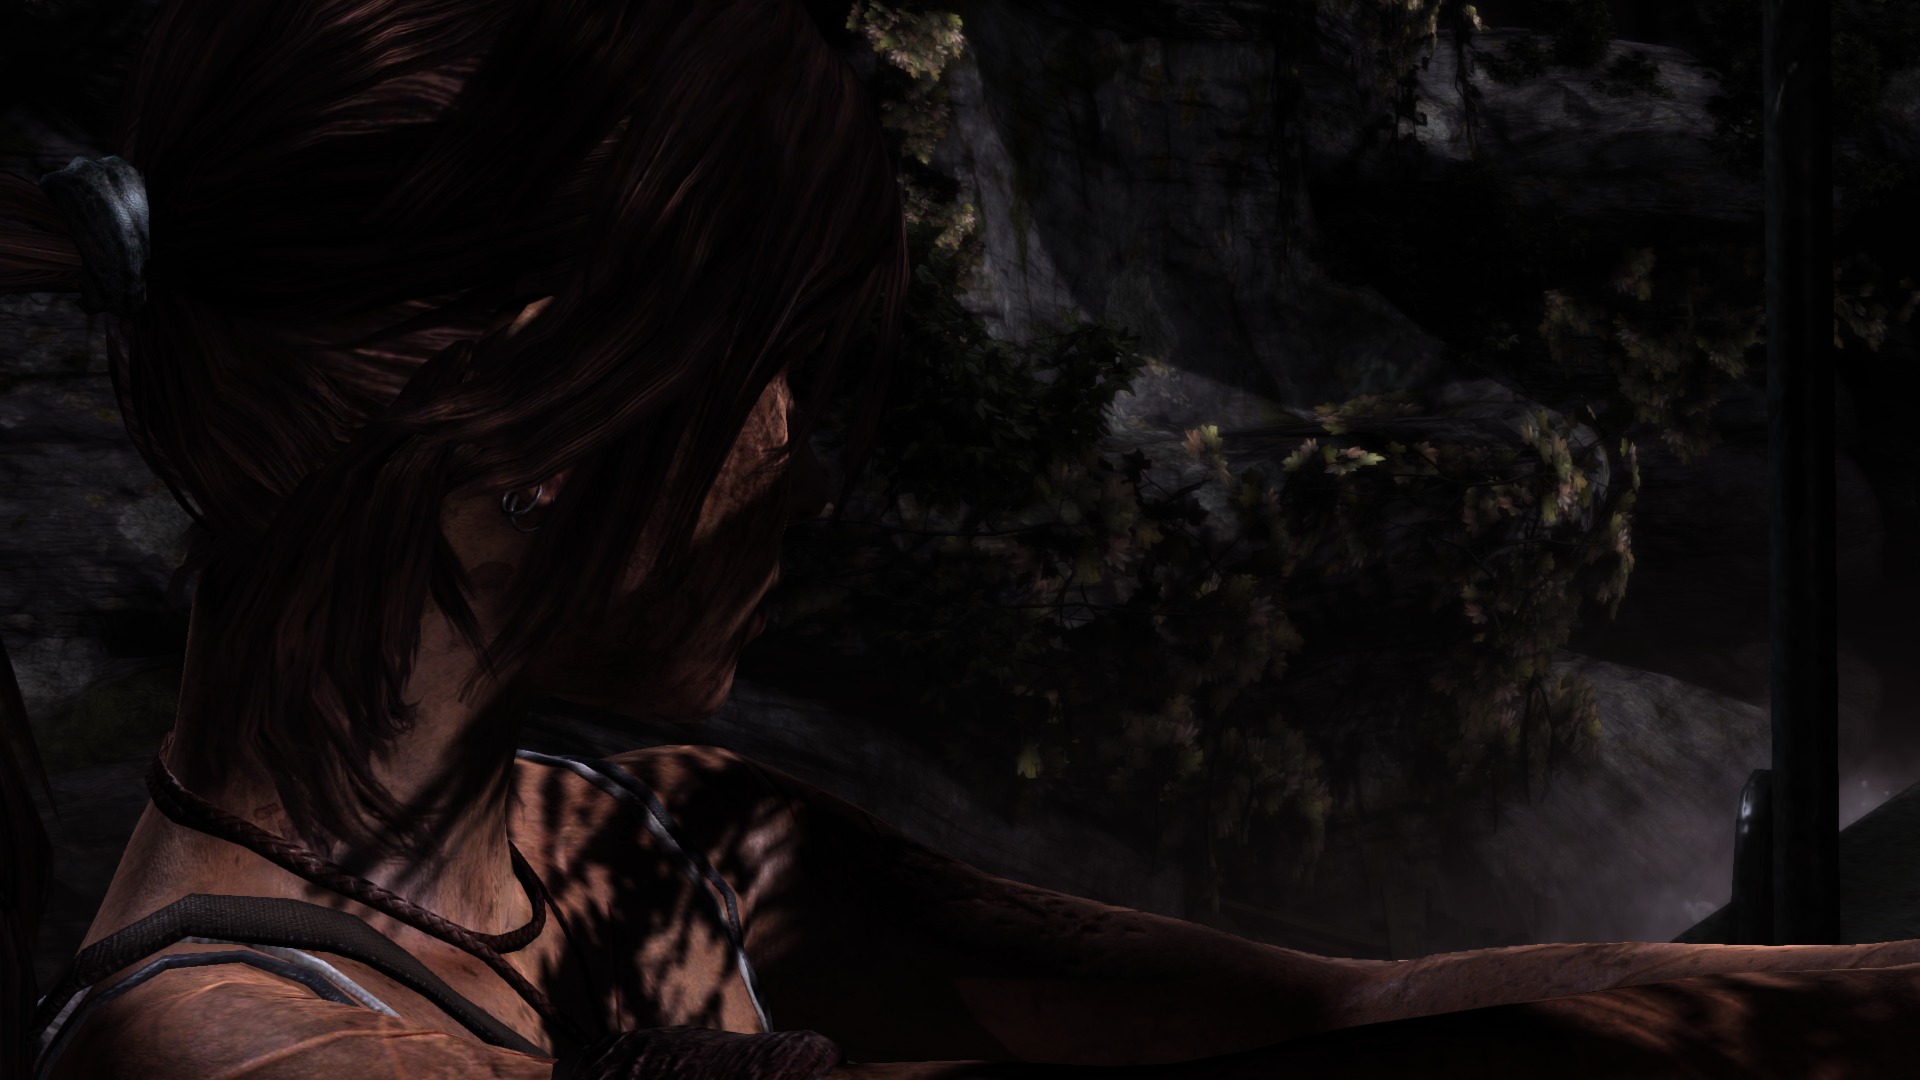 TombRaider2013031013035520001f6.png